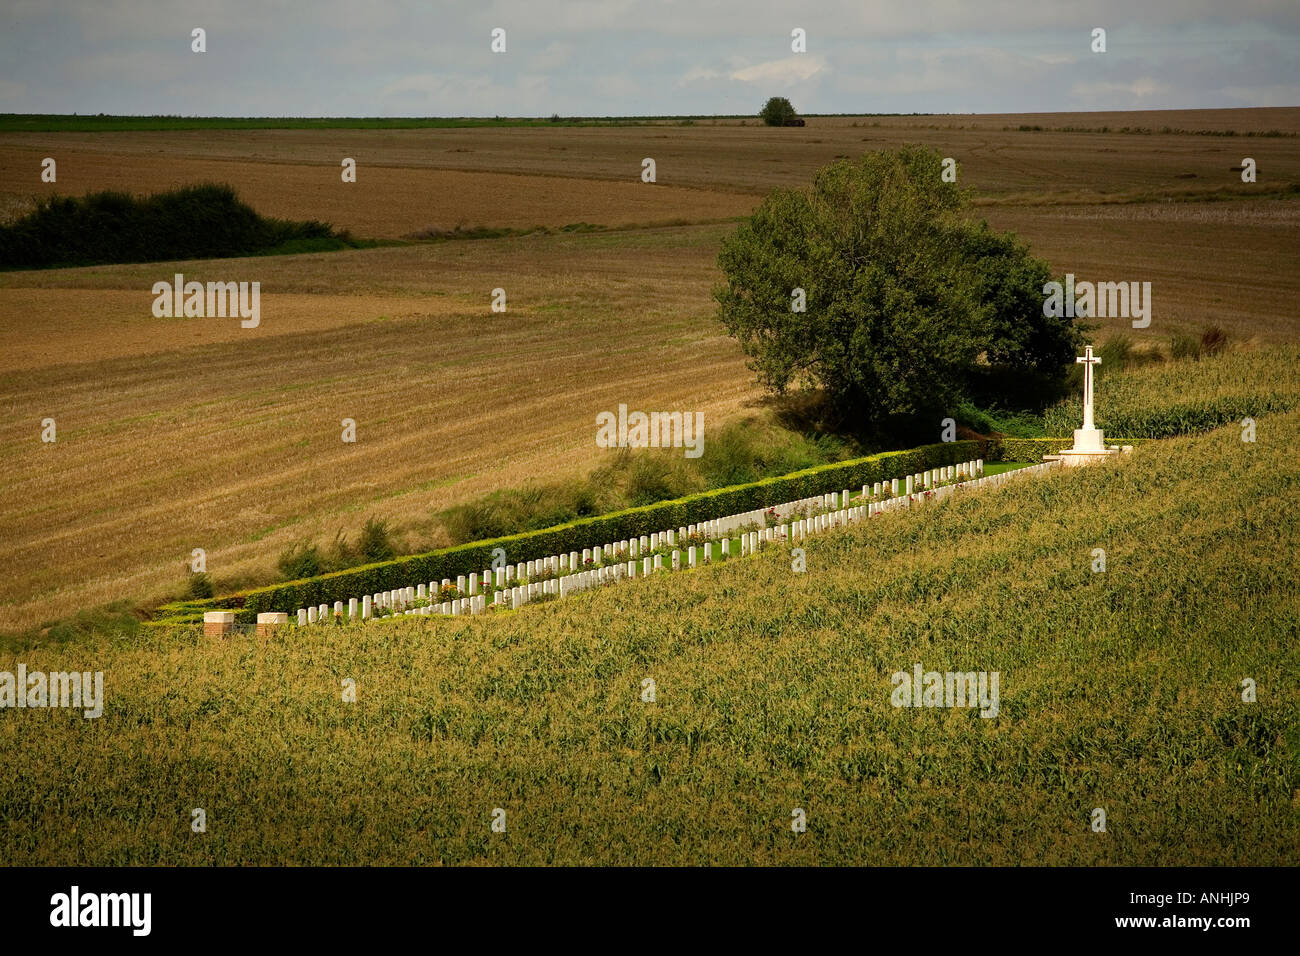 Beaumont Hamel cemetery containing British soldiers graves on the Somme battlefield in France Stock Photo